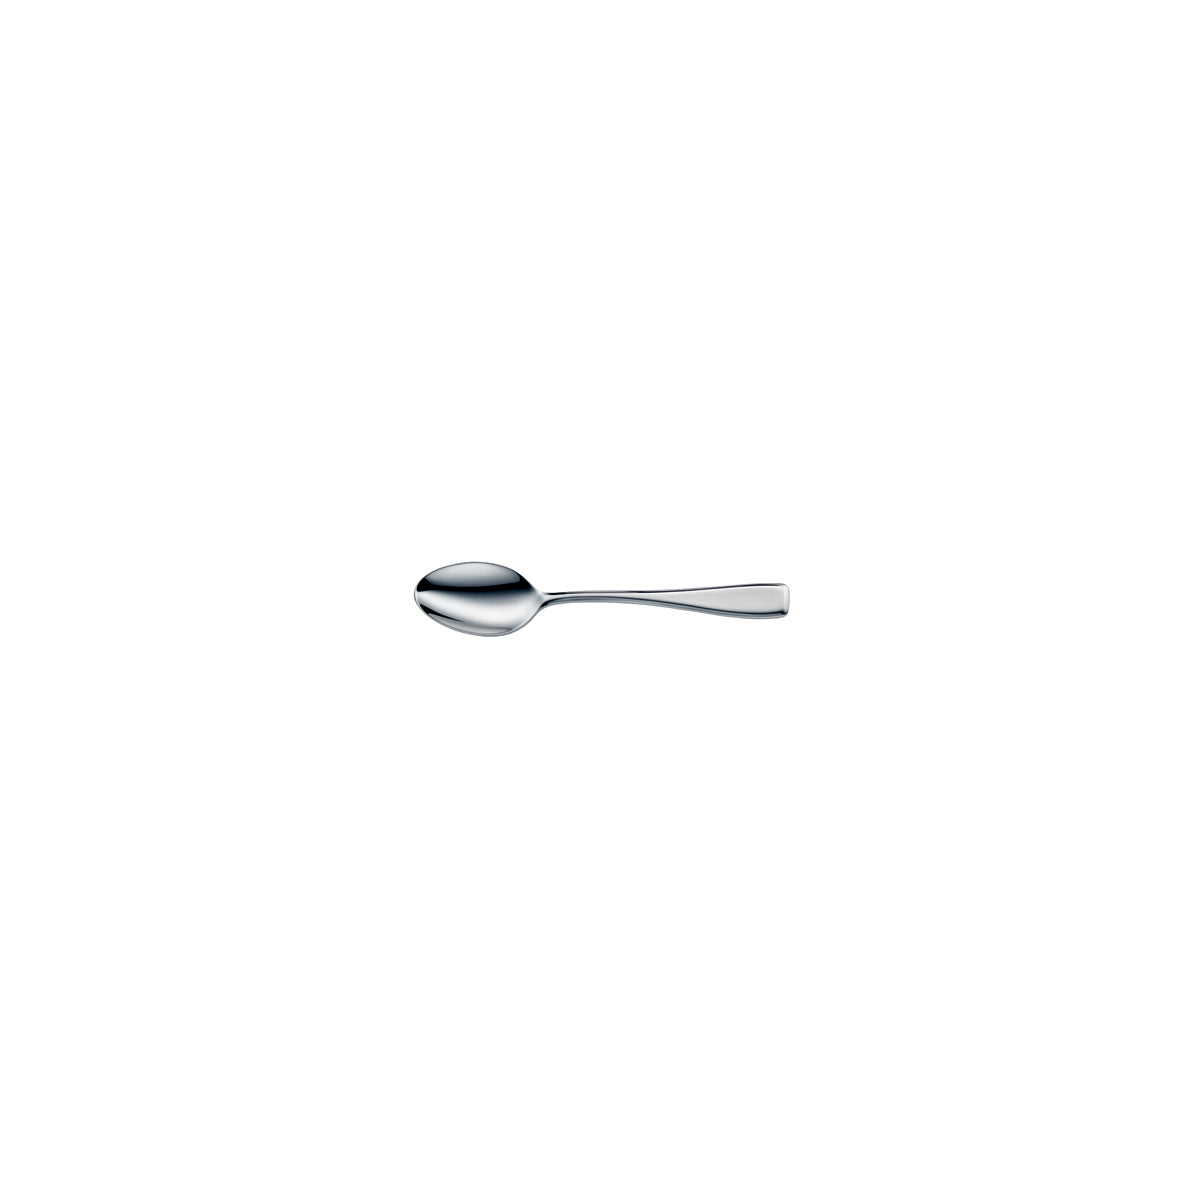 12.7909.6040 WMF Solid Coffee Spoon Stainless Steel Tomkin Australia Hospitality Supplies